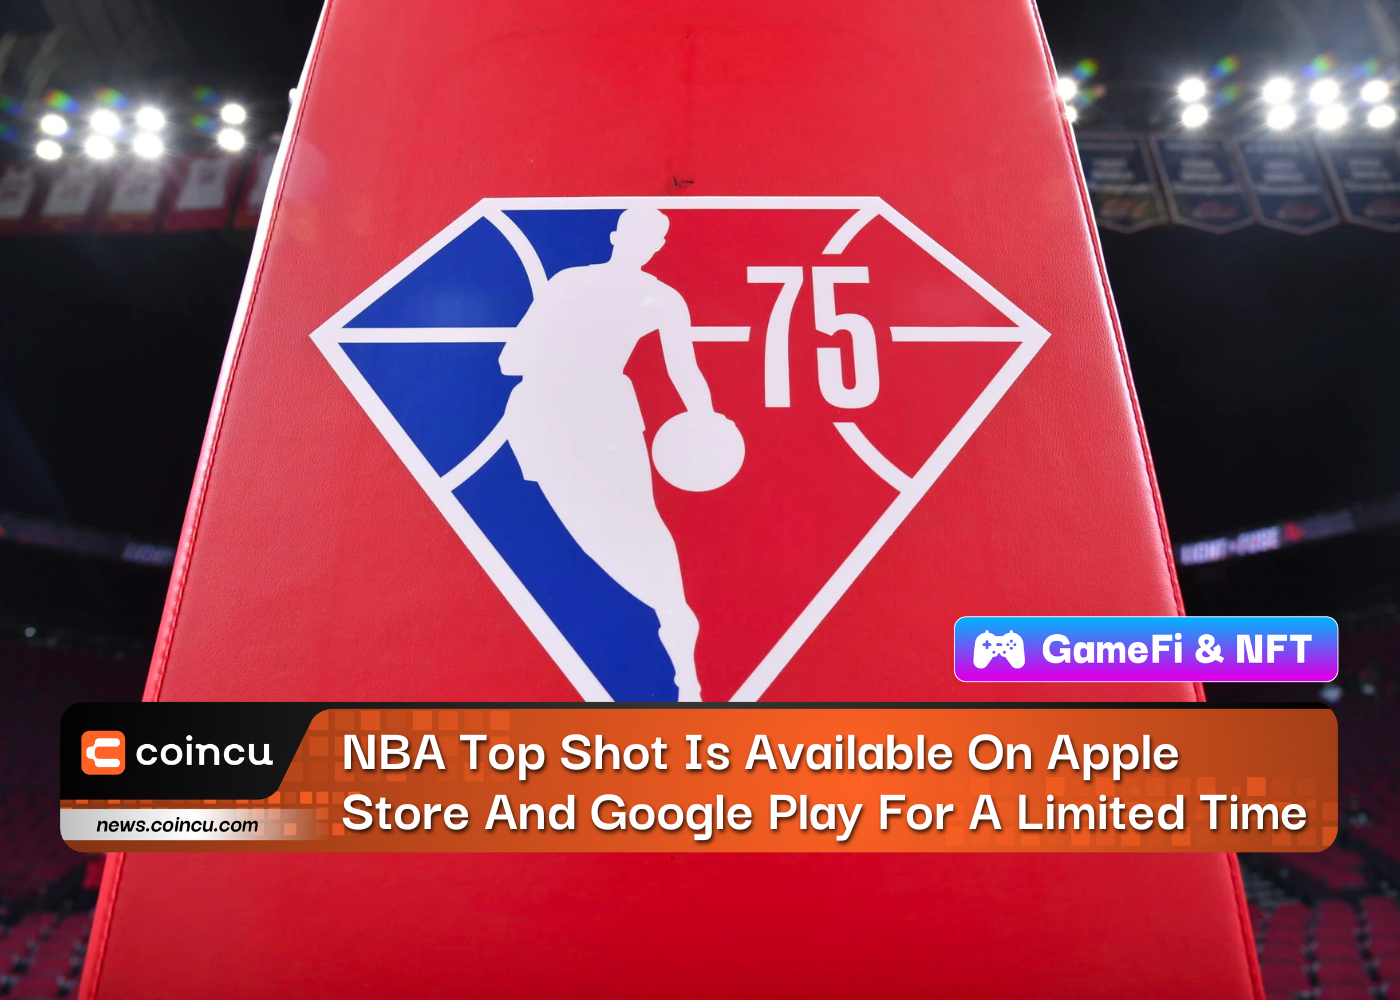 NBA Top Shot Is Available On Apple Store And Google Play For A Limited Time